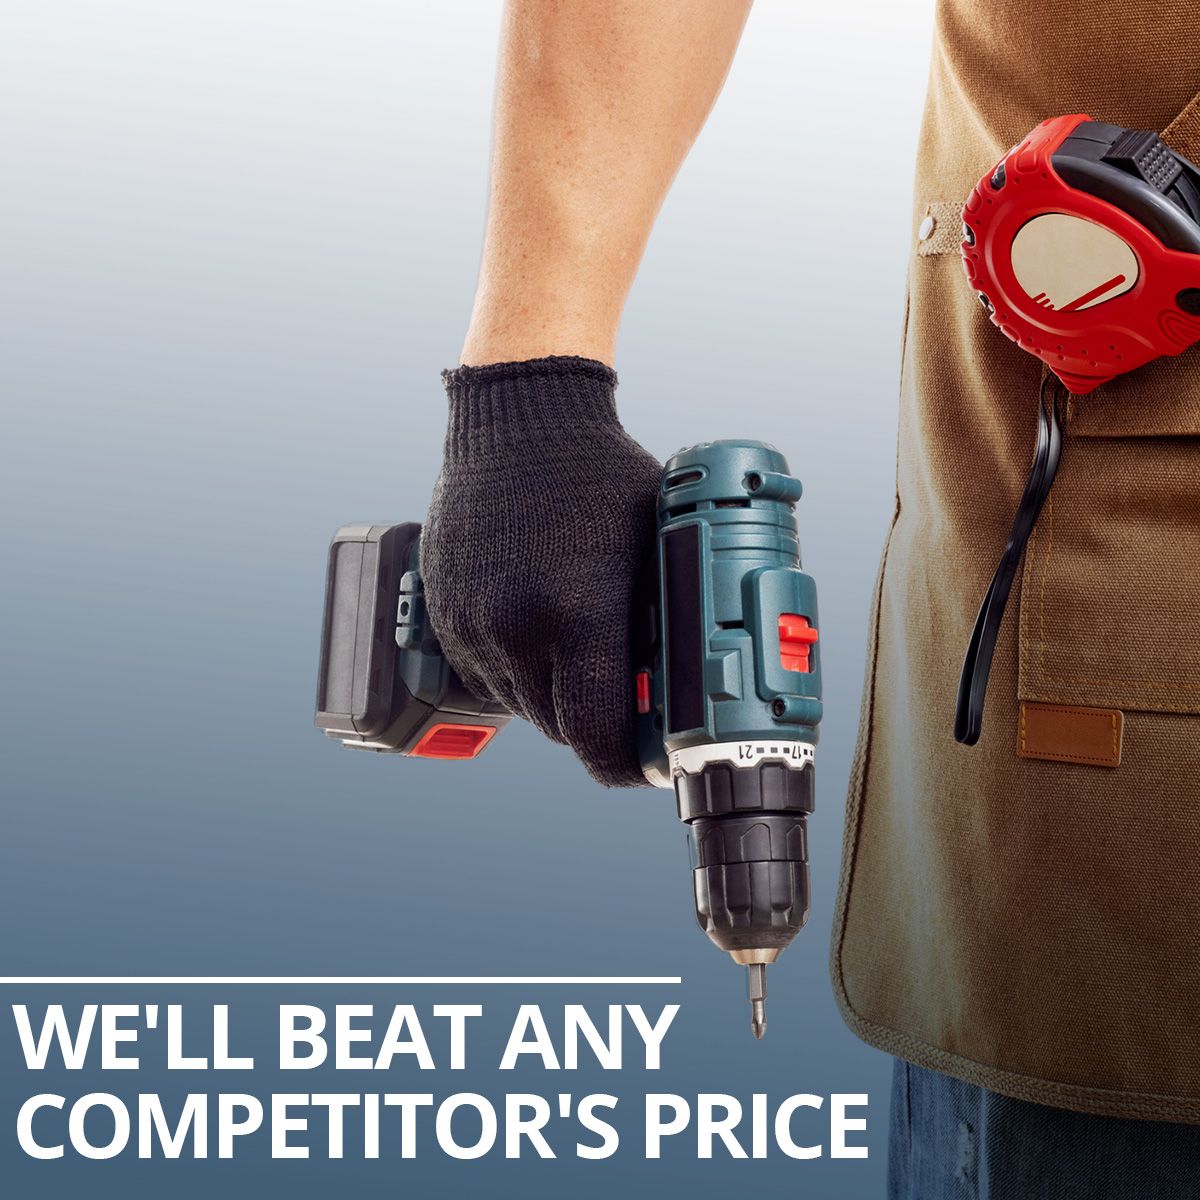 We'll Beat Any Competitor's Price